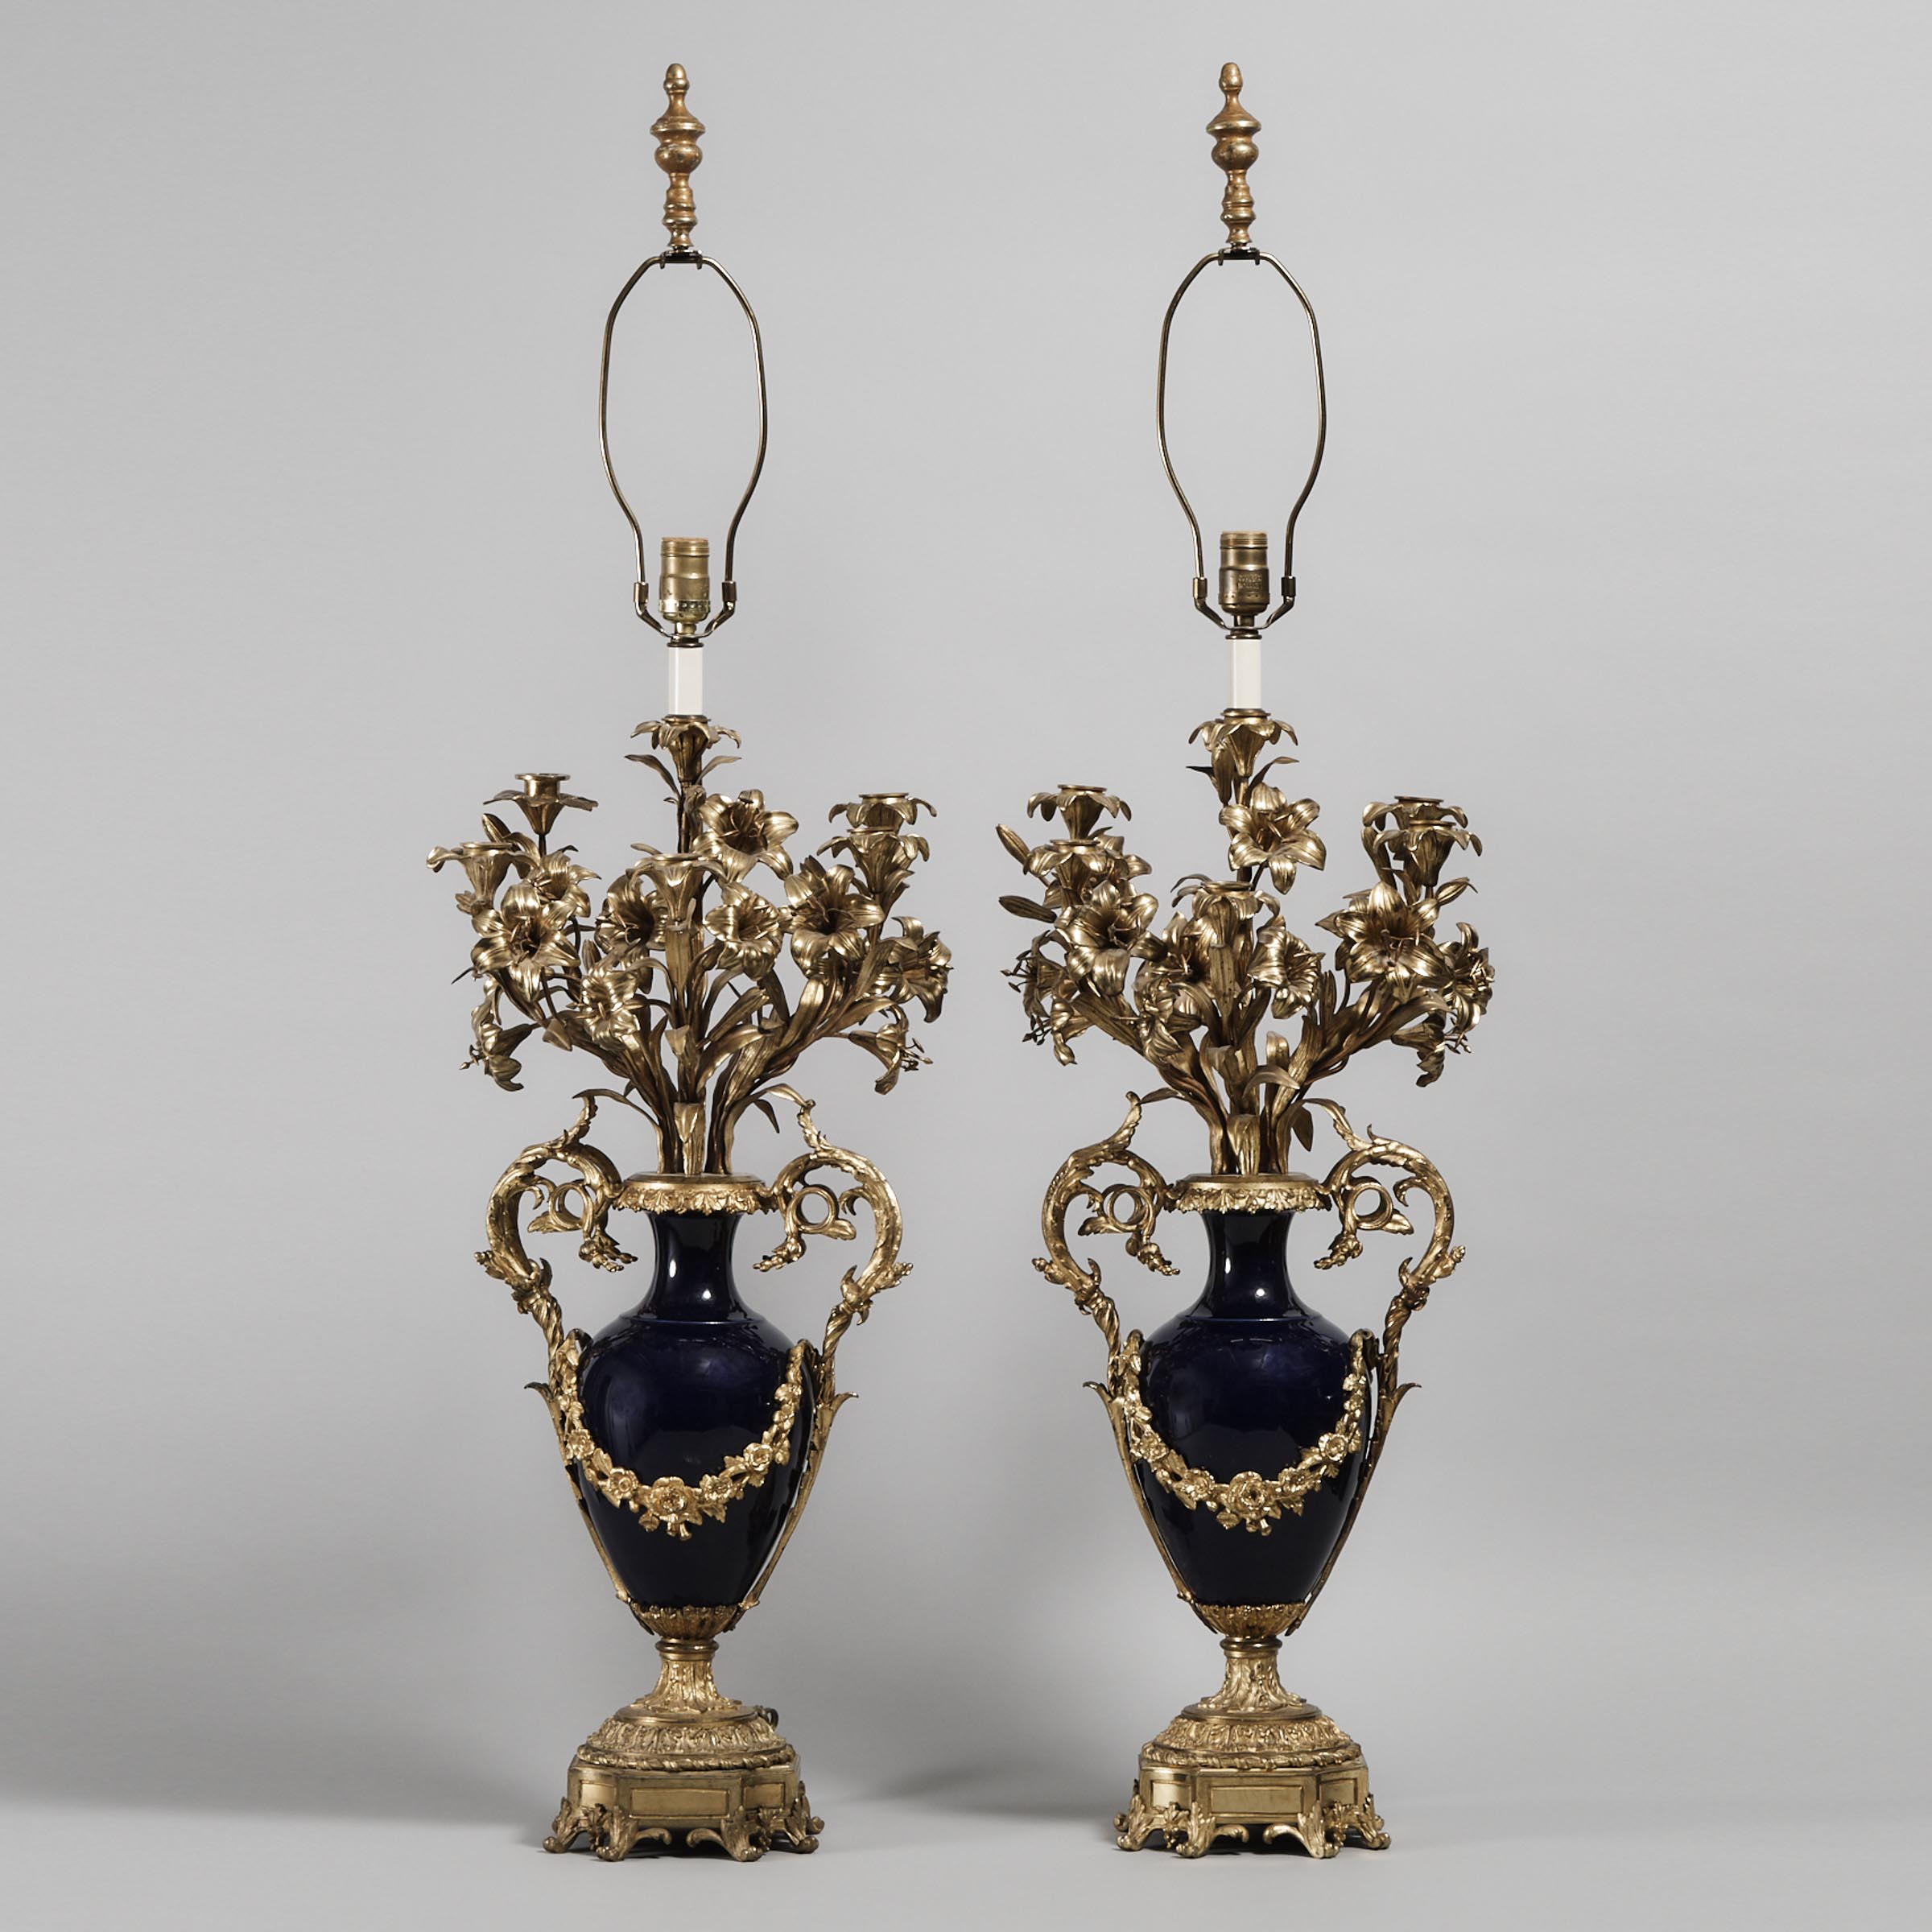 Pair of Large Napoleon III French Ormolu Mounted Porcelain Candelabra, late 19th century